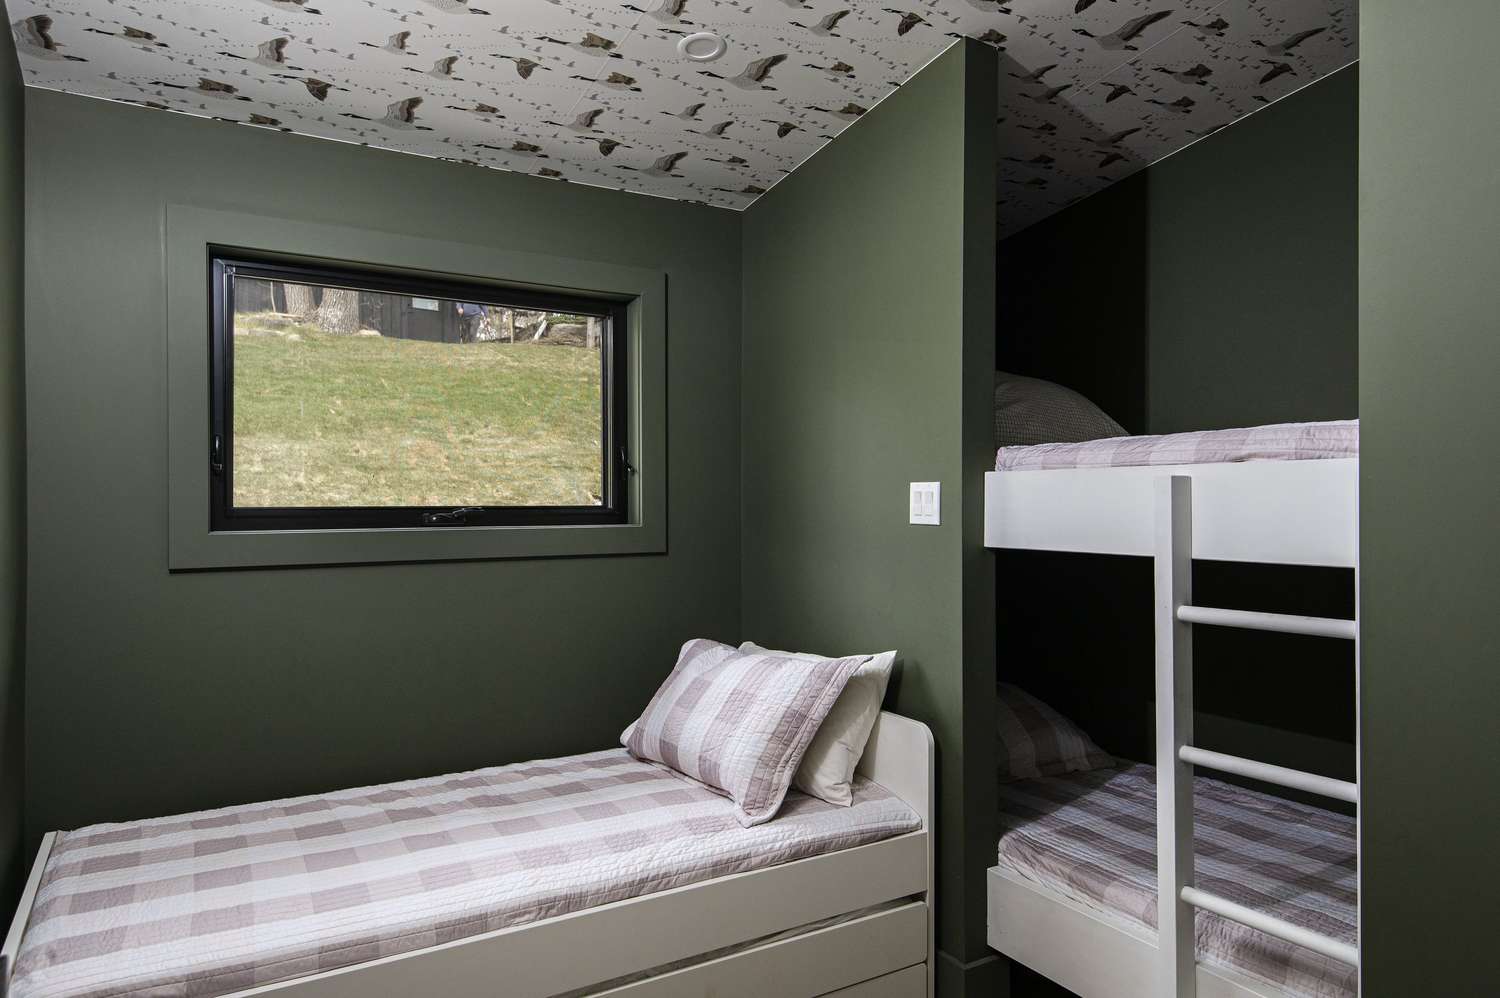 Green walls and wallpapered ceiling in a bedroom with bunk beds